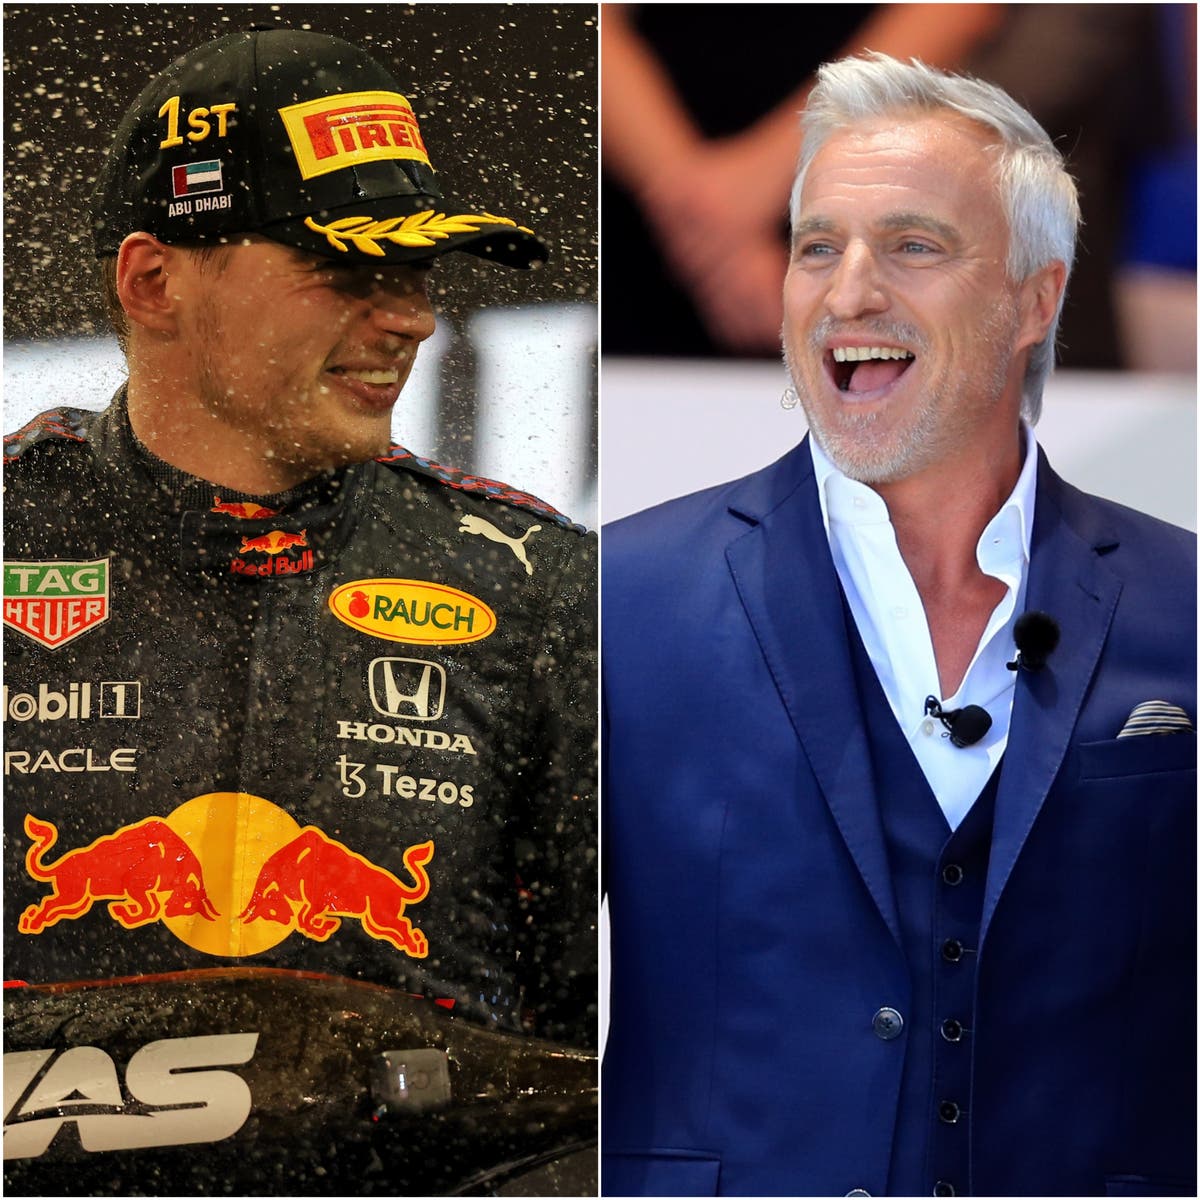 Verstappen crowned F1 champion, Ginola leaves castle – Sunday’s sporting social